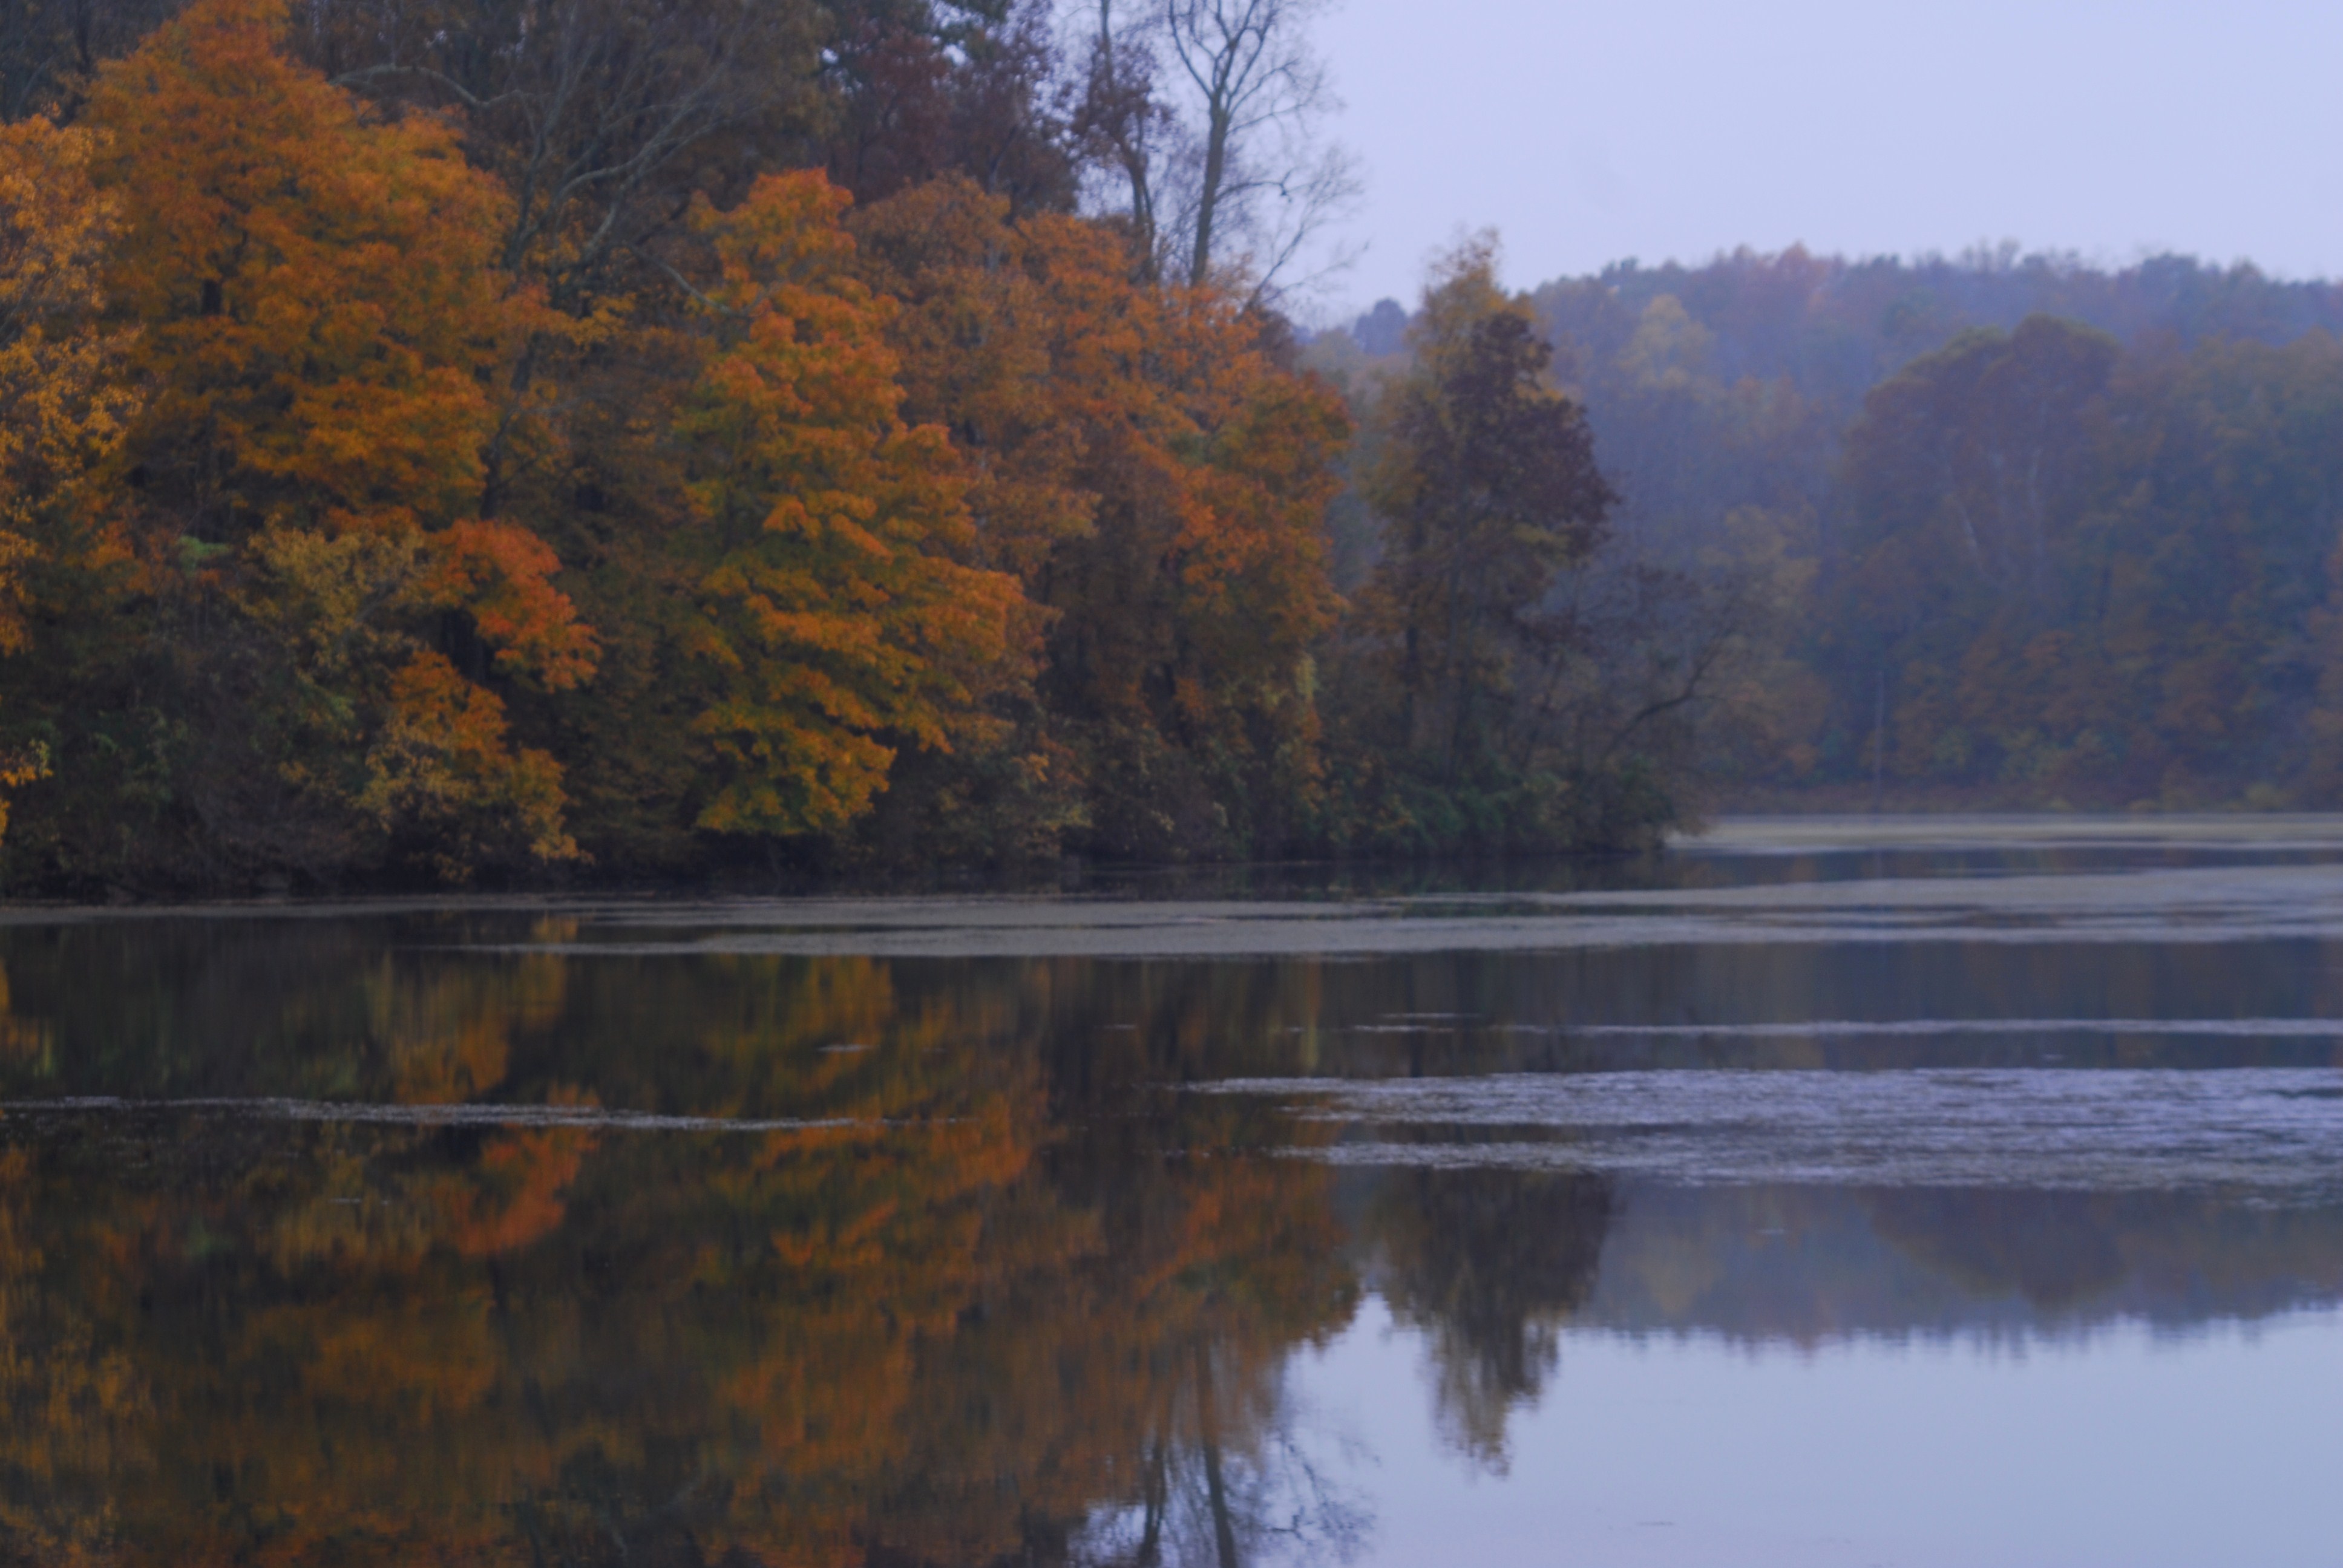 An image of a lake with trees in fall color.